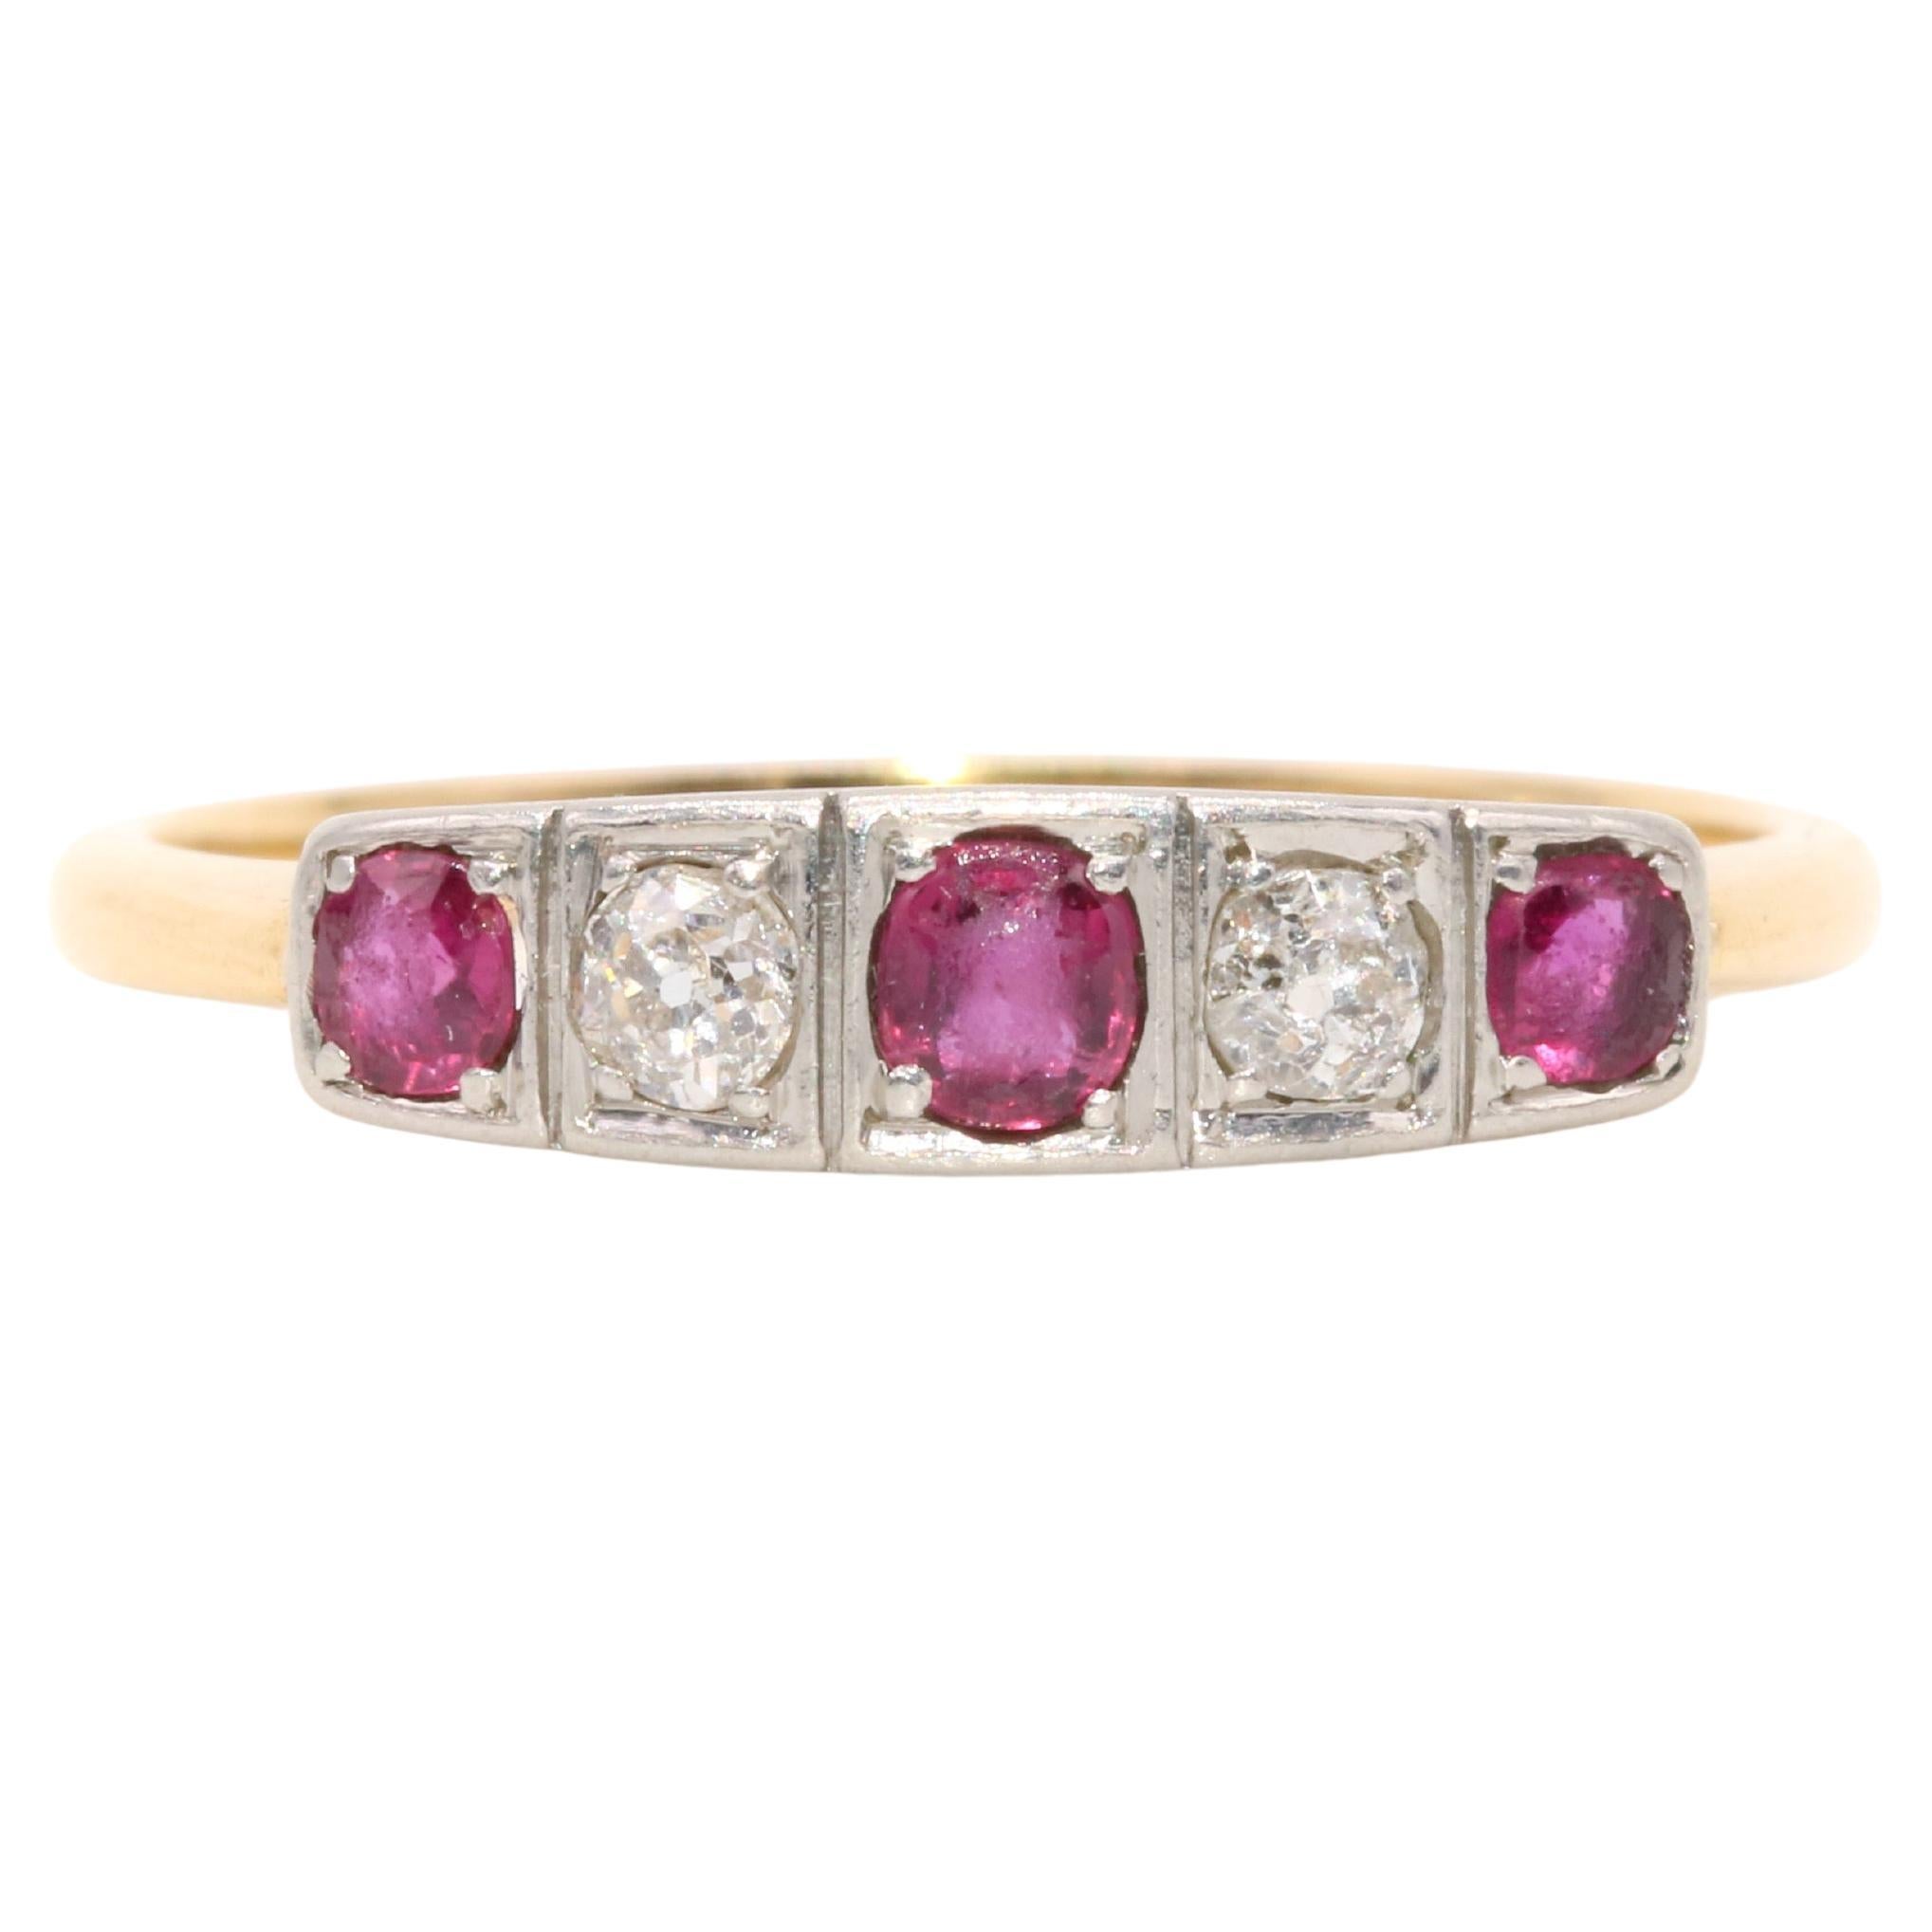 Art Deco 18K Yellow Gold and Platinum Ruby and Old Mine Cut Diamond 5 Stone Ring